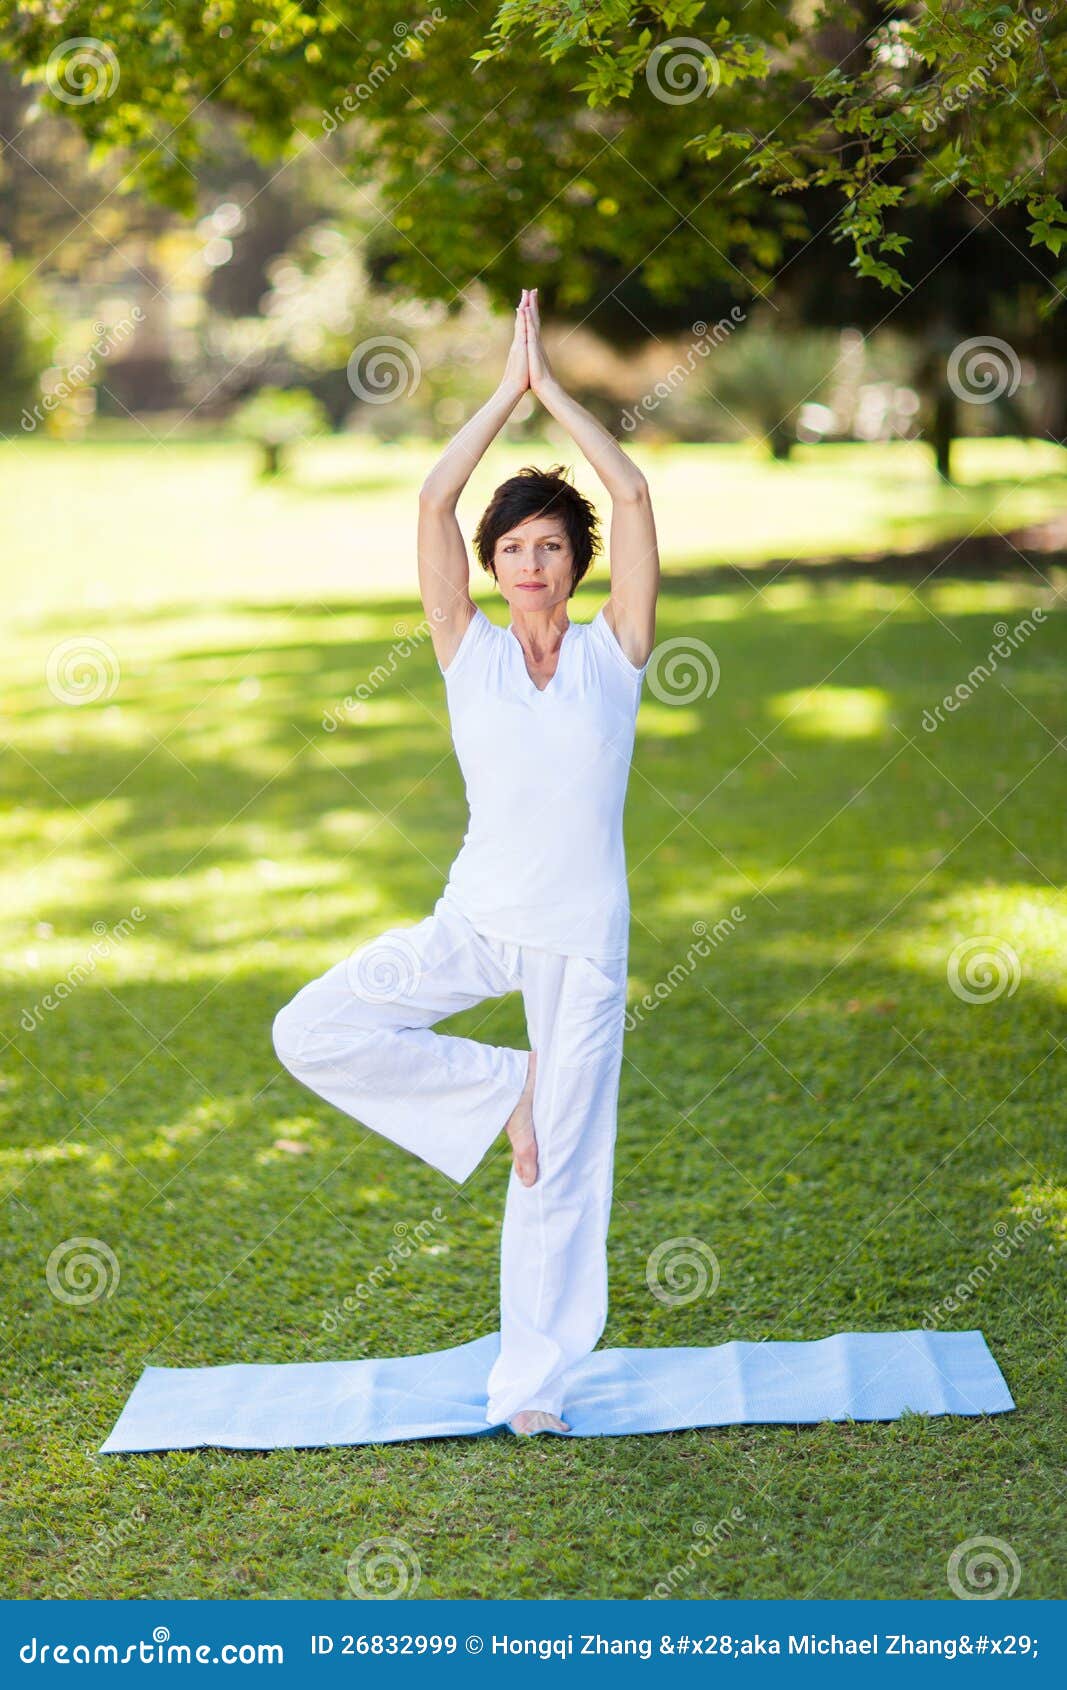 middle-aged woman doing yoga - Stock Image - F003/8652 - Science